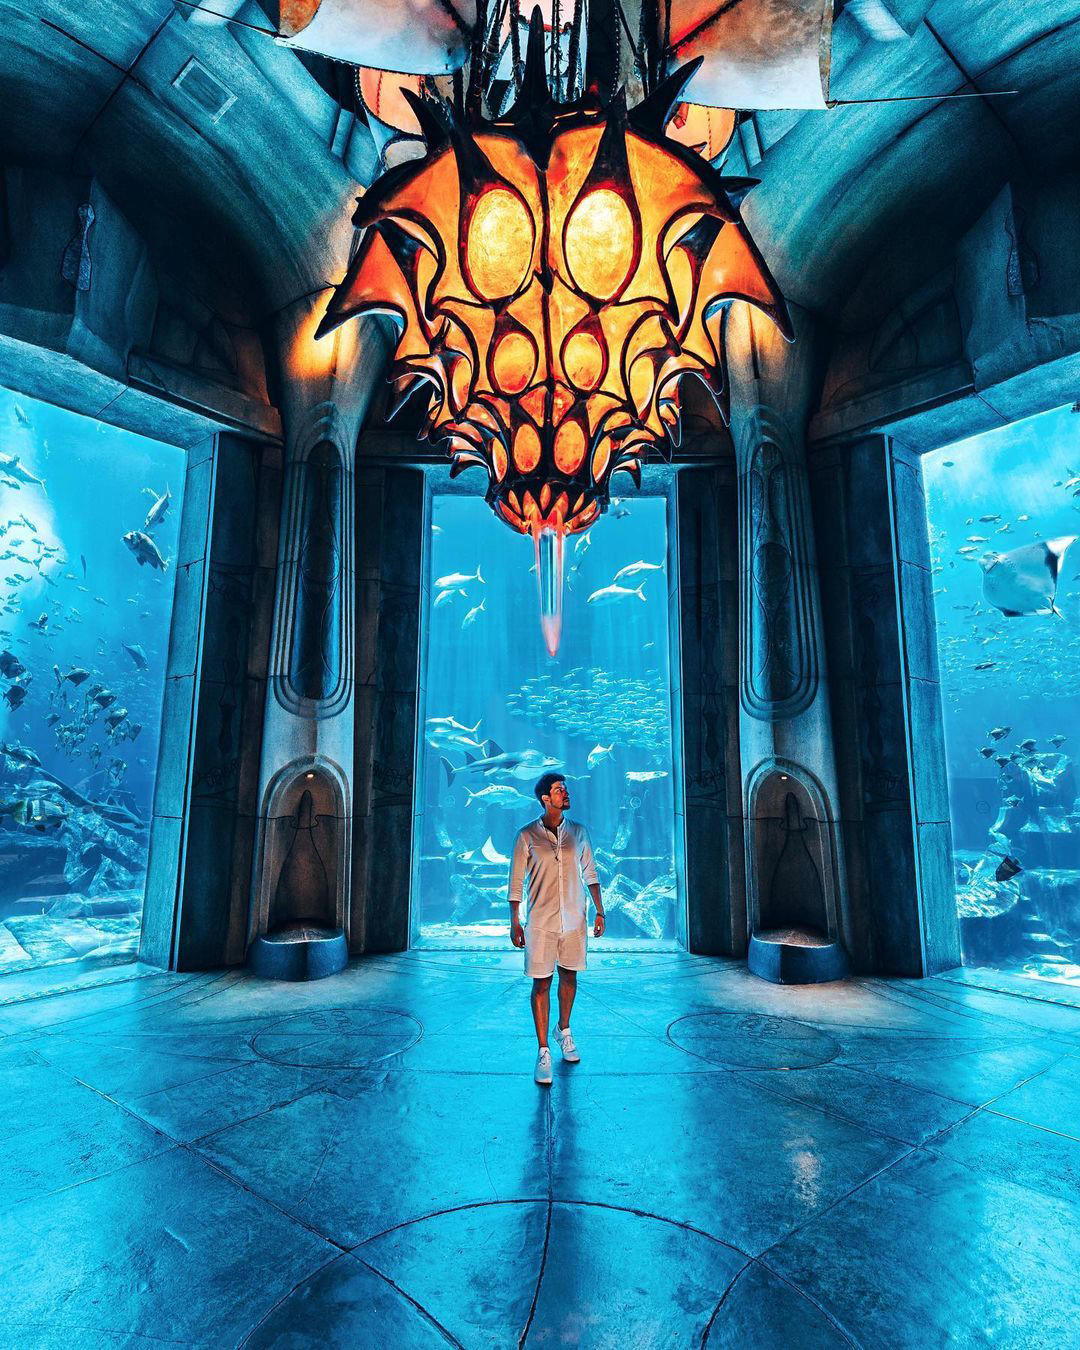 image  1 Atlantis The Palm, Dubai - Take a stroll through our #LostChambersAquarium and immerse yourself in t